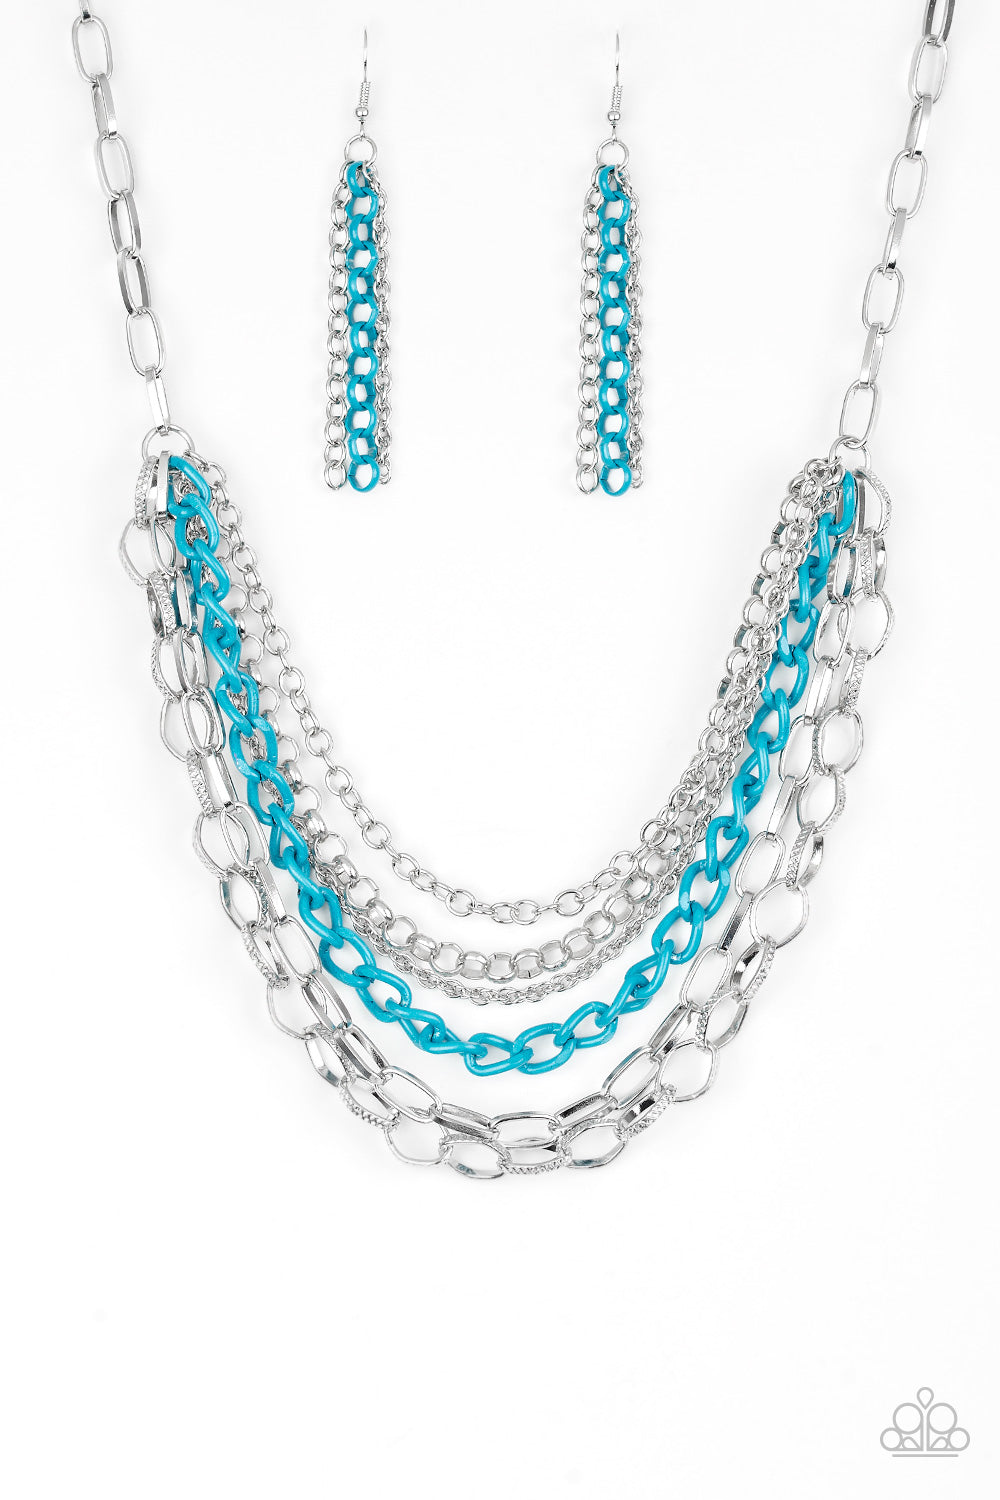 COLOR BOMB - BLUE AND SILVER MULTI CHAIN INDUSTRIAL NECKLACE